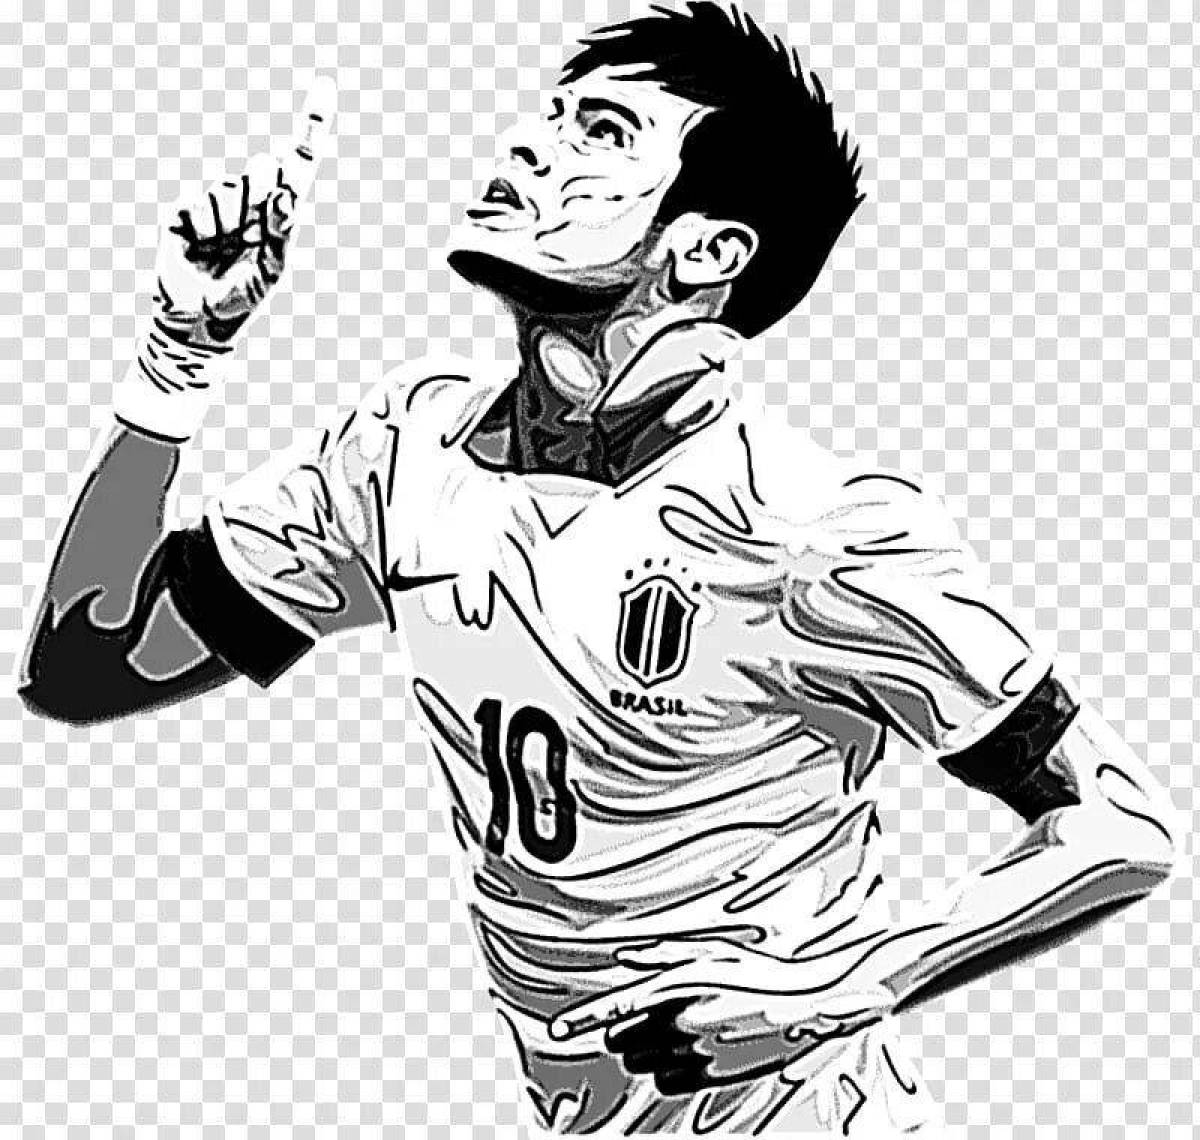 Neymar amazing soccer player coloring page